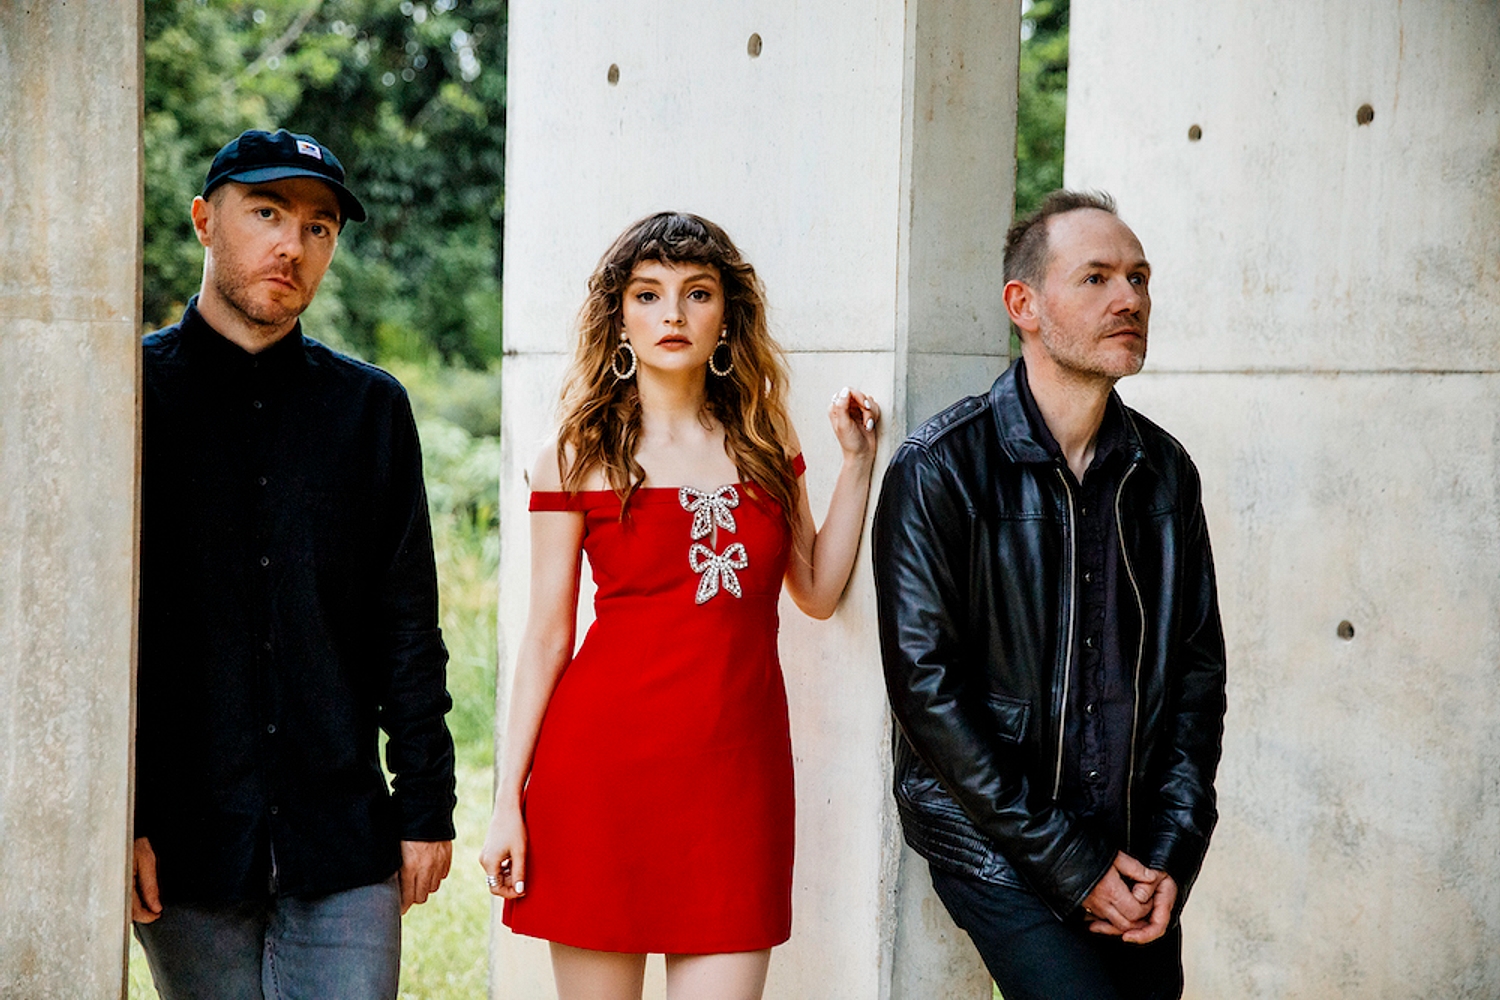 CHVRCHES release new single ‘Over’